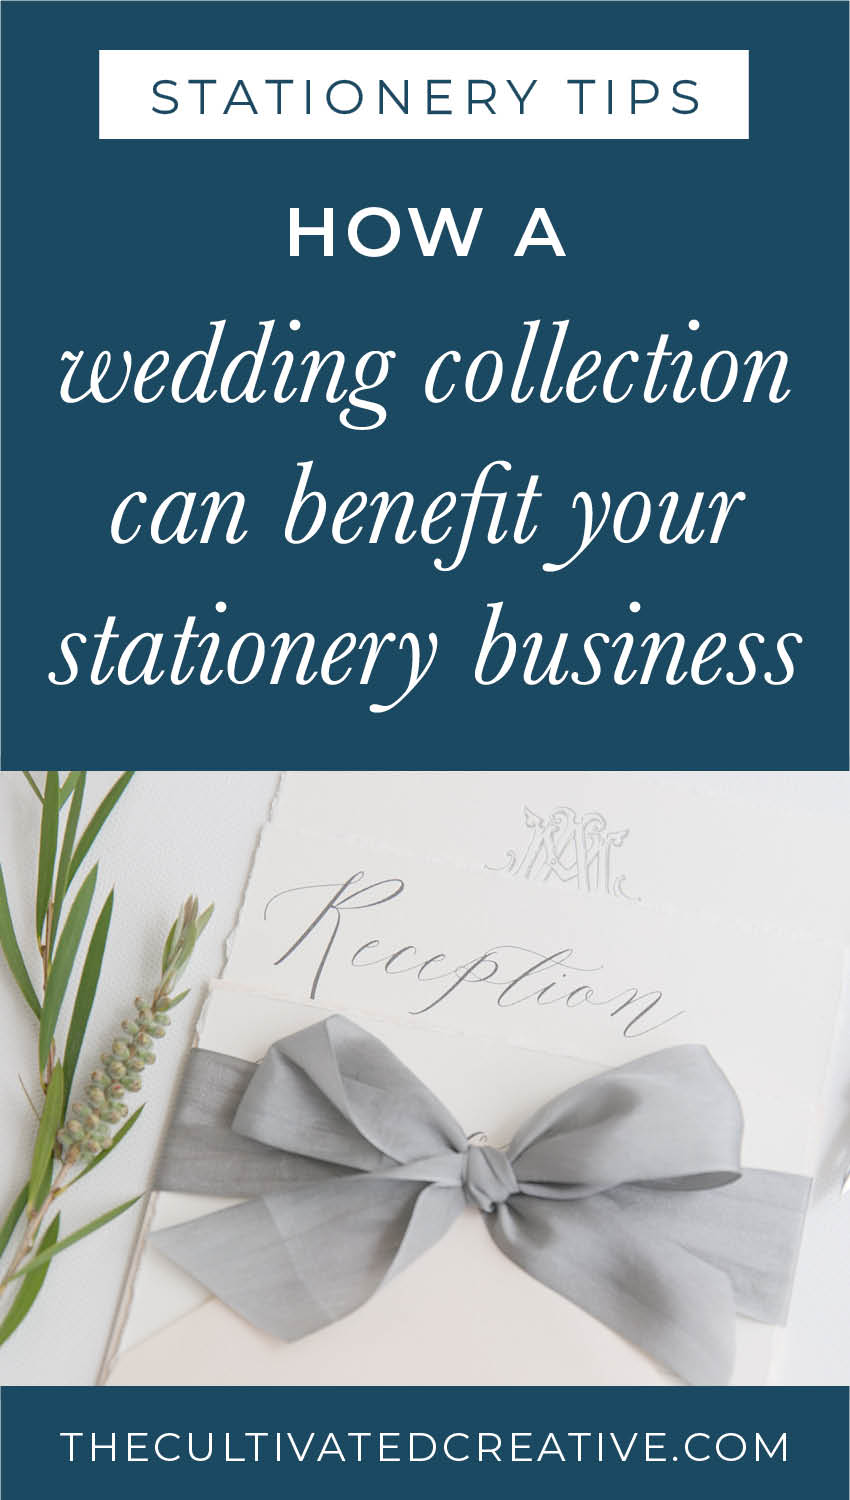 how developing a wedding invitation collection can benefit your stationery business